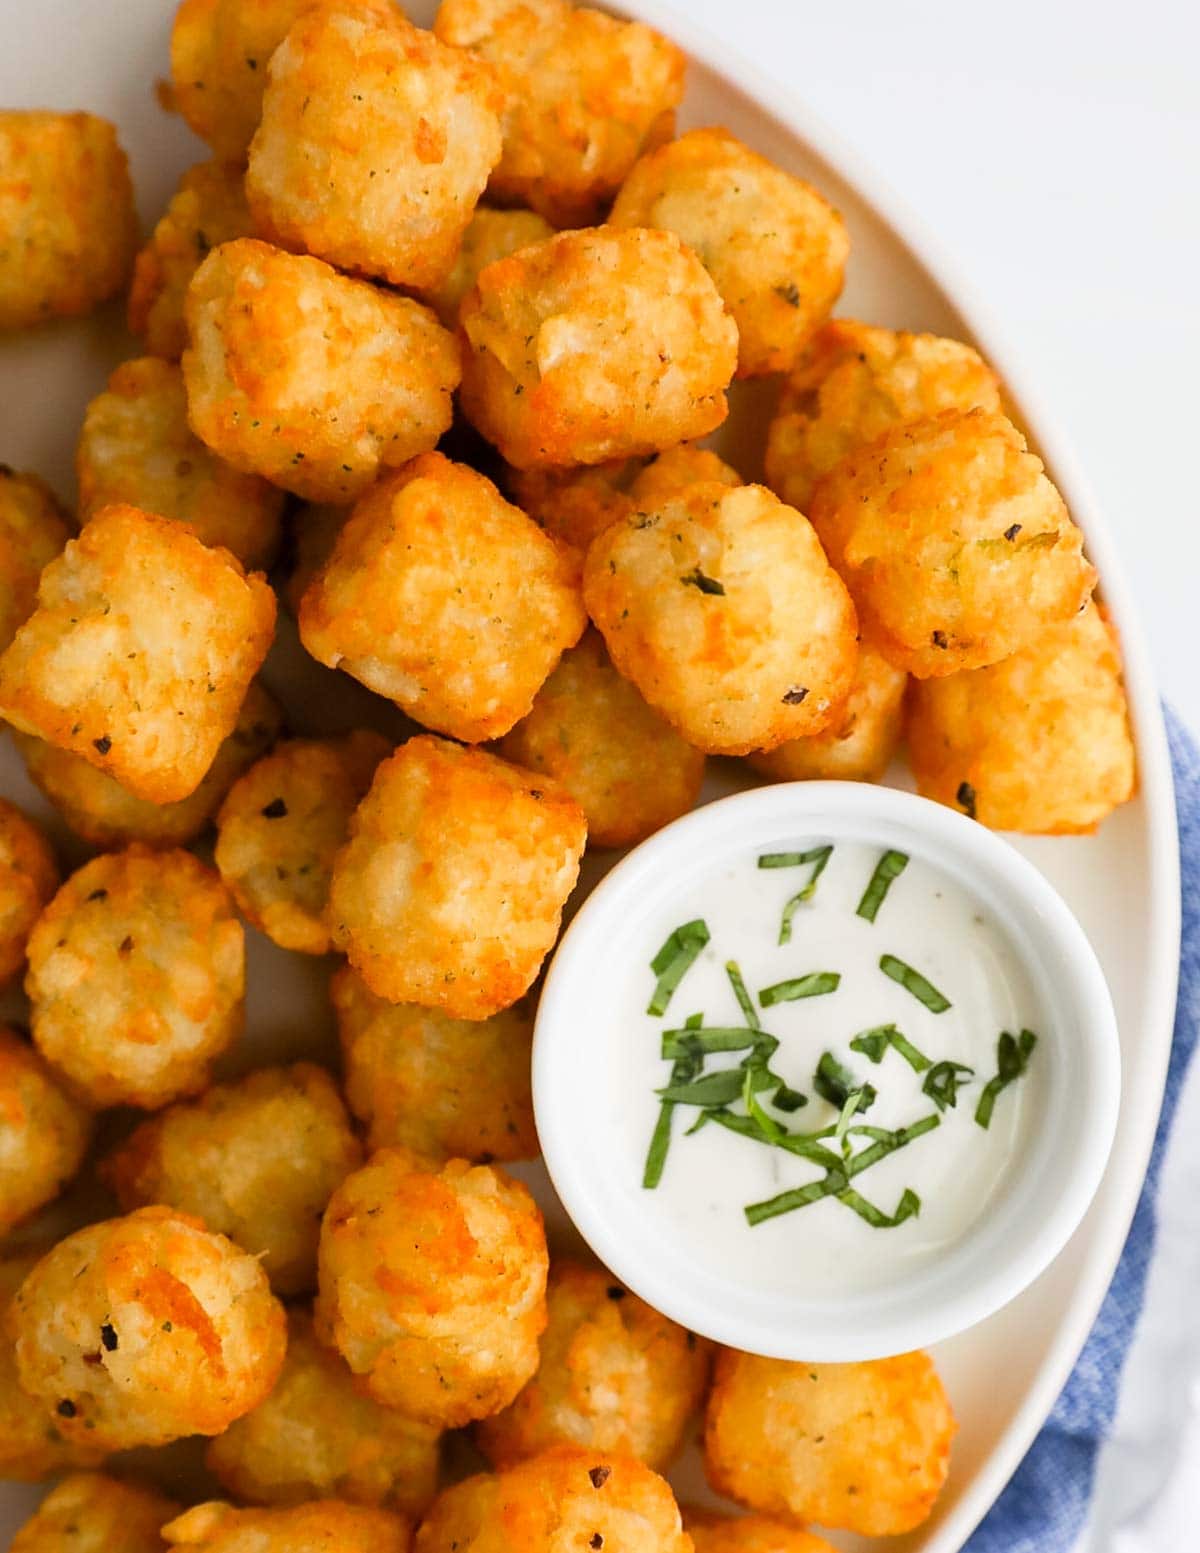 A close-up picture of tater tots on a white plate along with a white dish filled with ranch dressing and fresh basil.